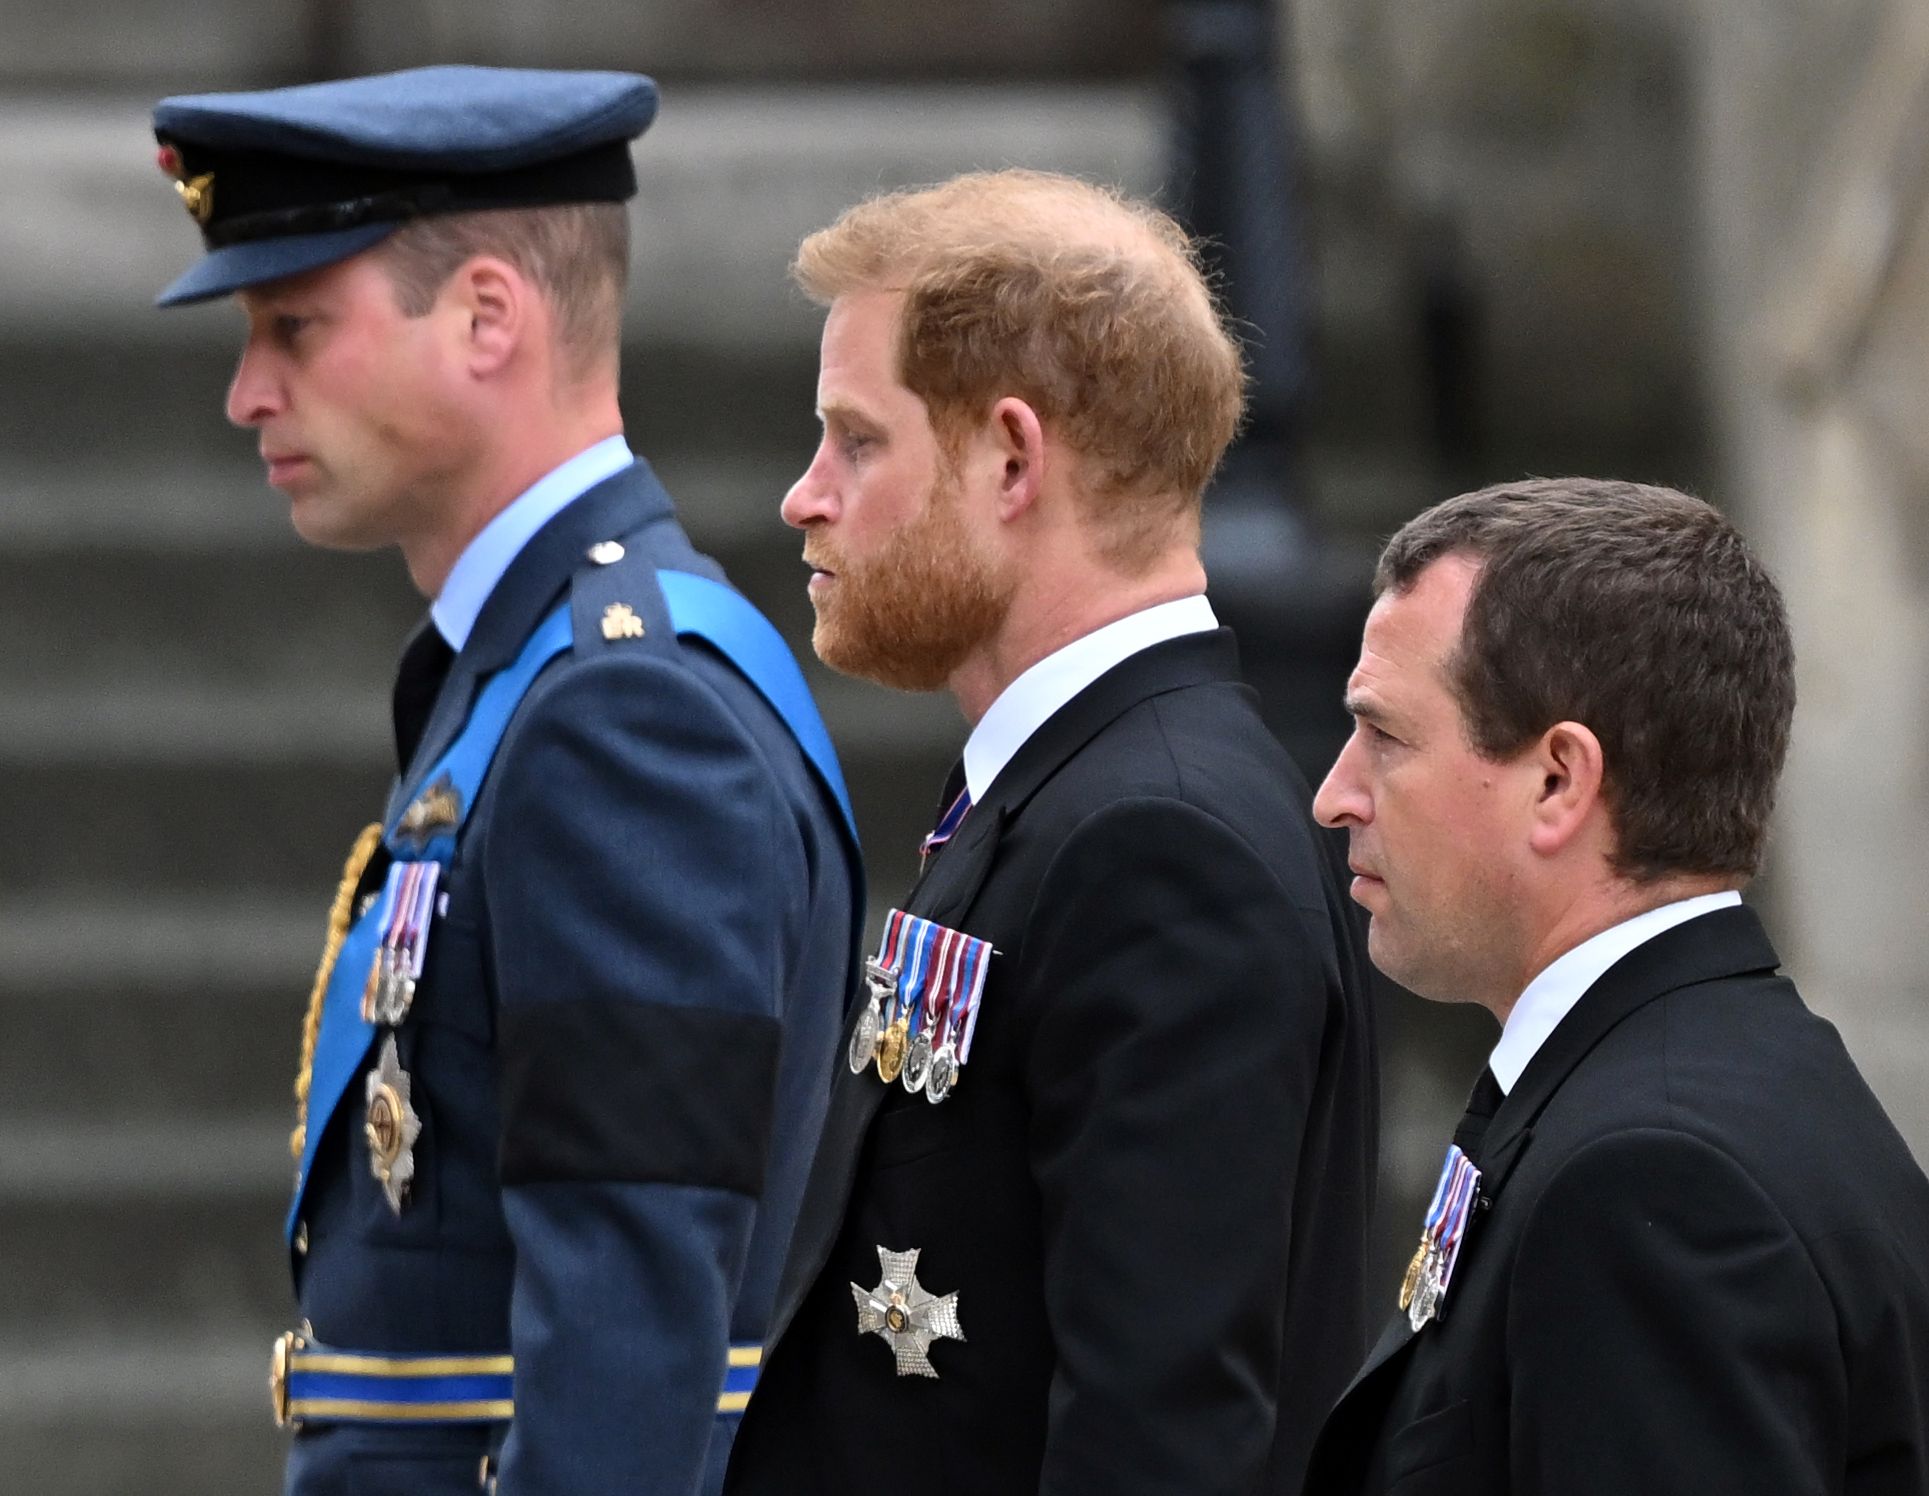 <p>Queen Elizabeth II's eldest grandsons -- Prince William, Prince Harry and Peter Phillips -- stood behind her coffin at Westminster Abbey in London during <a href="https://www.wonderwall.com/celebrity/royals/best-photos-from-queen-elizabeth-ii-funeral-king-charles-princes-william-prince-harry-george-charlotte-kate-meghan652347.gallery">her state funeral</a> on Sept. 19, 2022.</p>